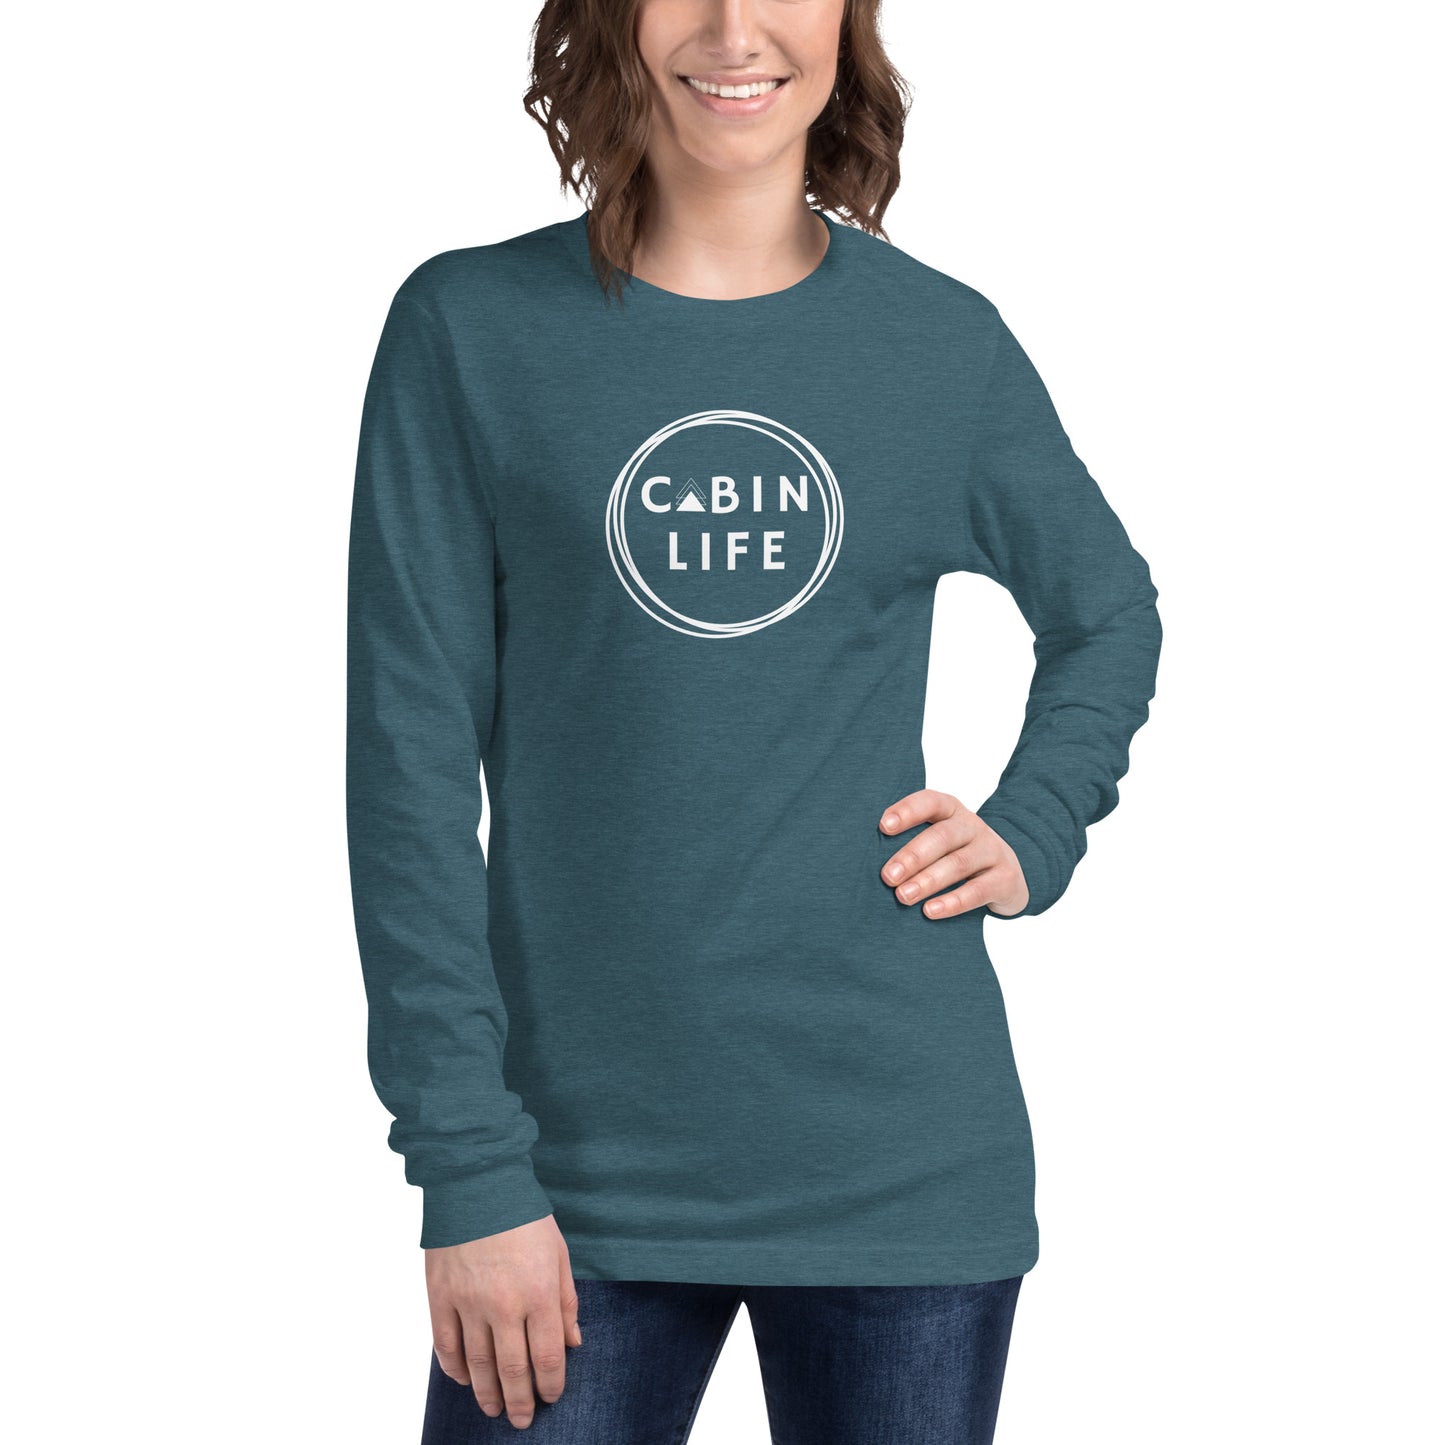 cabin life t-shirt tshirt top clothing aframe a-frame woods forest wear circle graphic comfy bella canvas vacation diy project